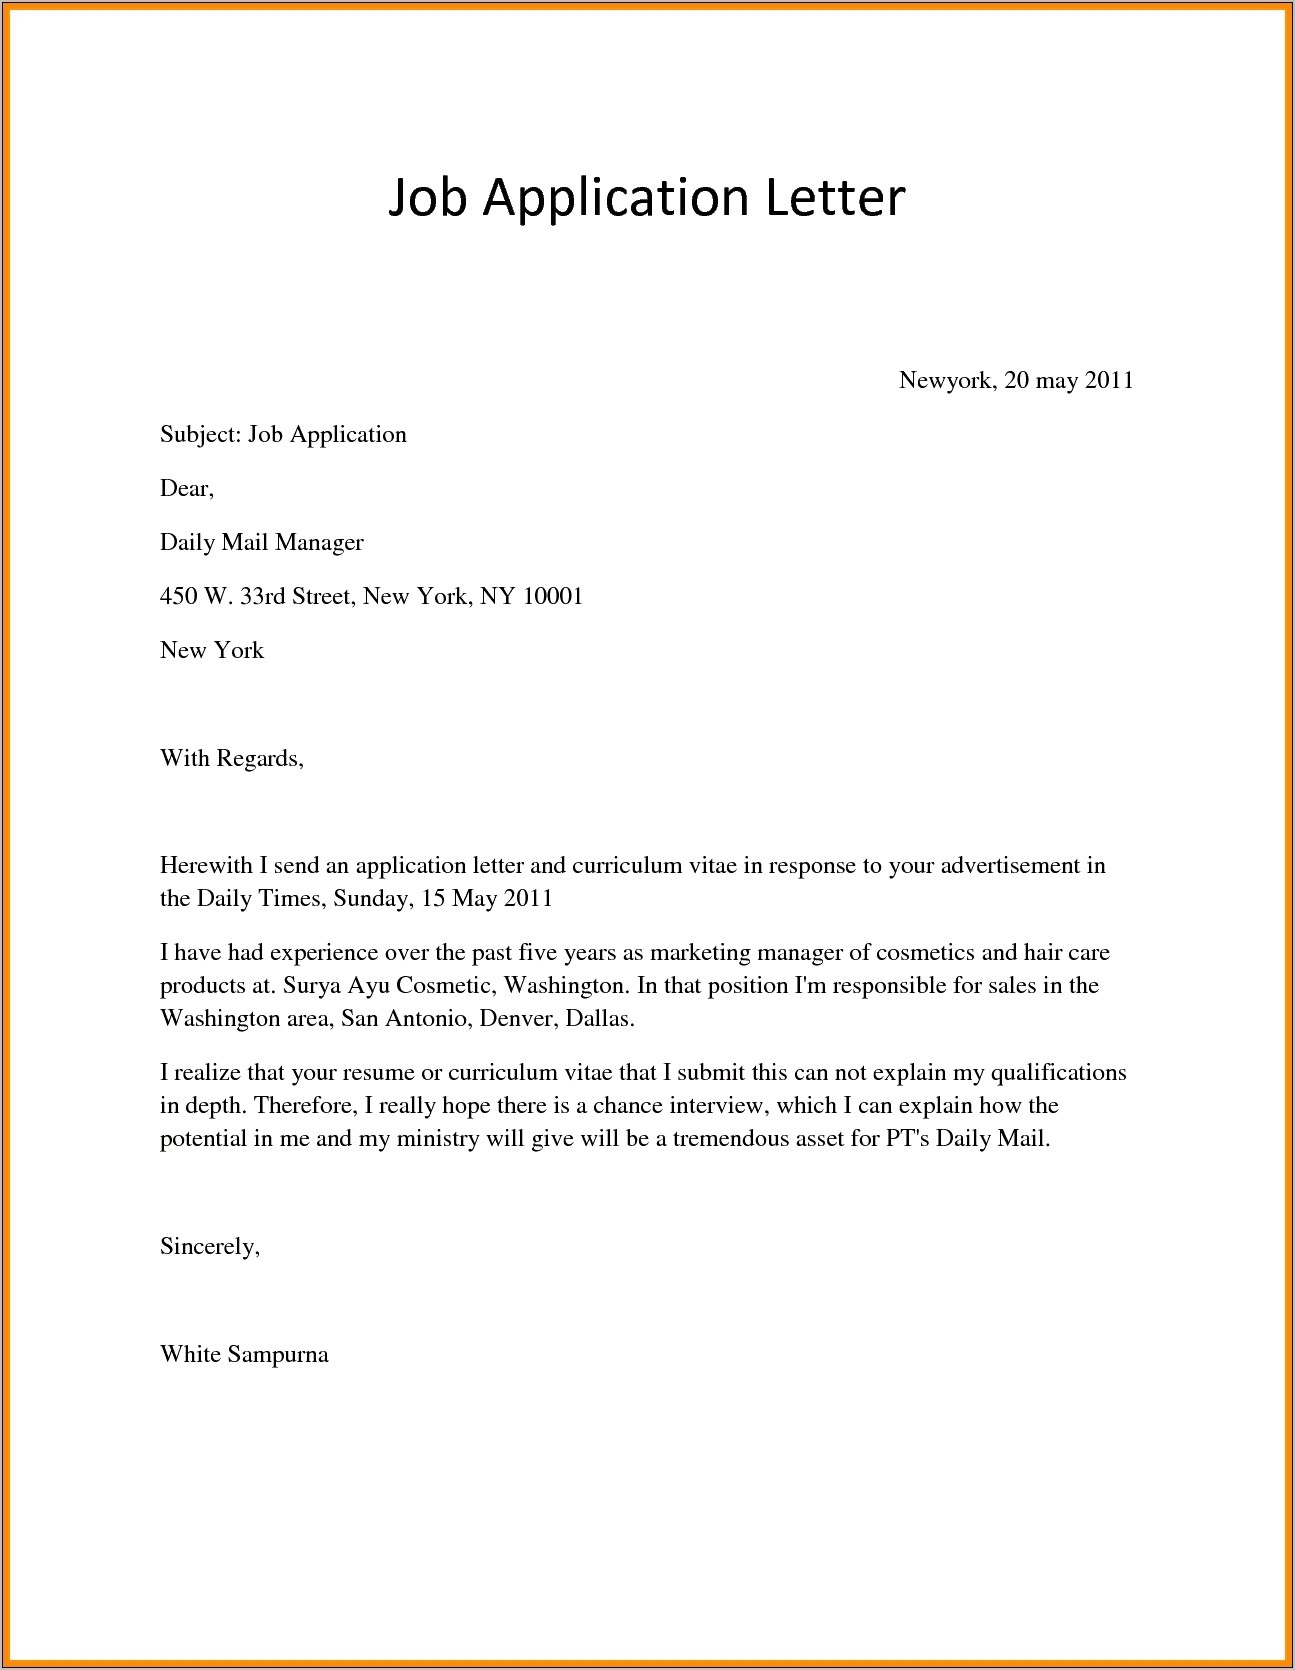 Model Letter Of Application With Resume